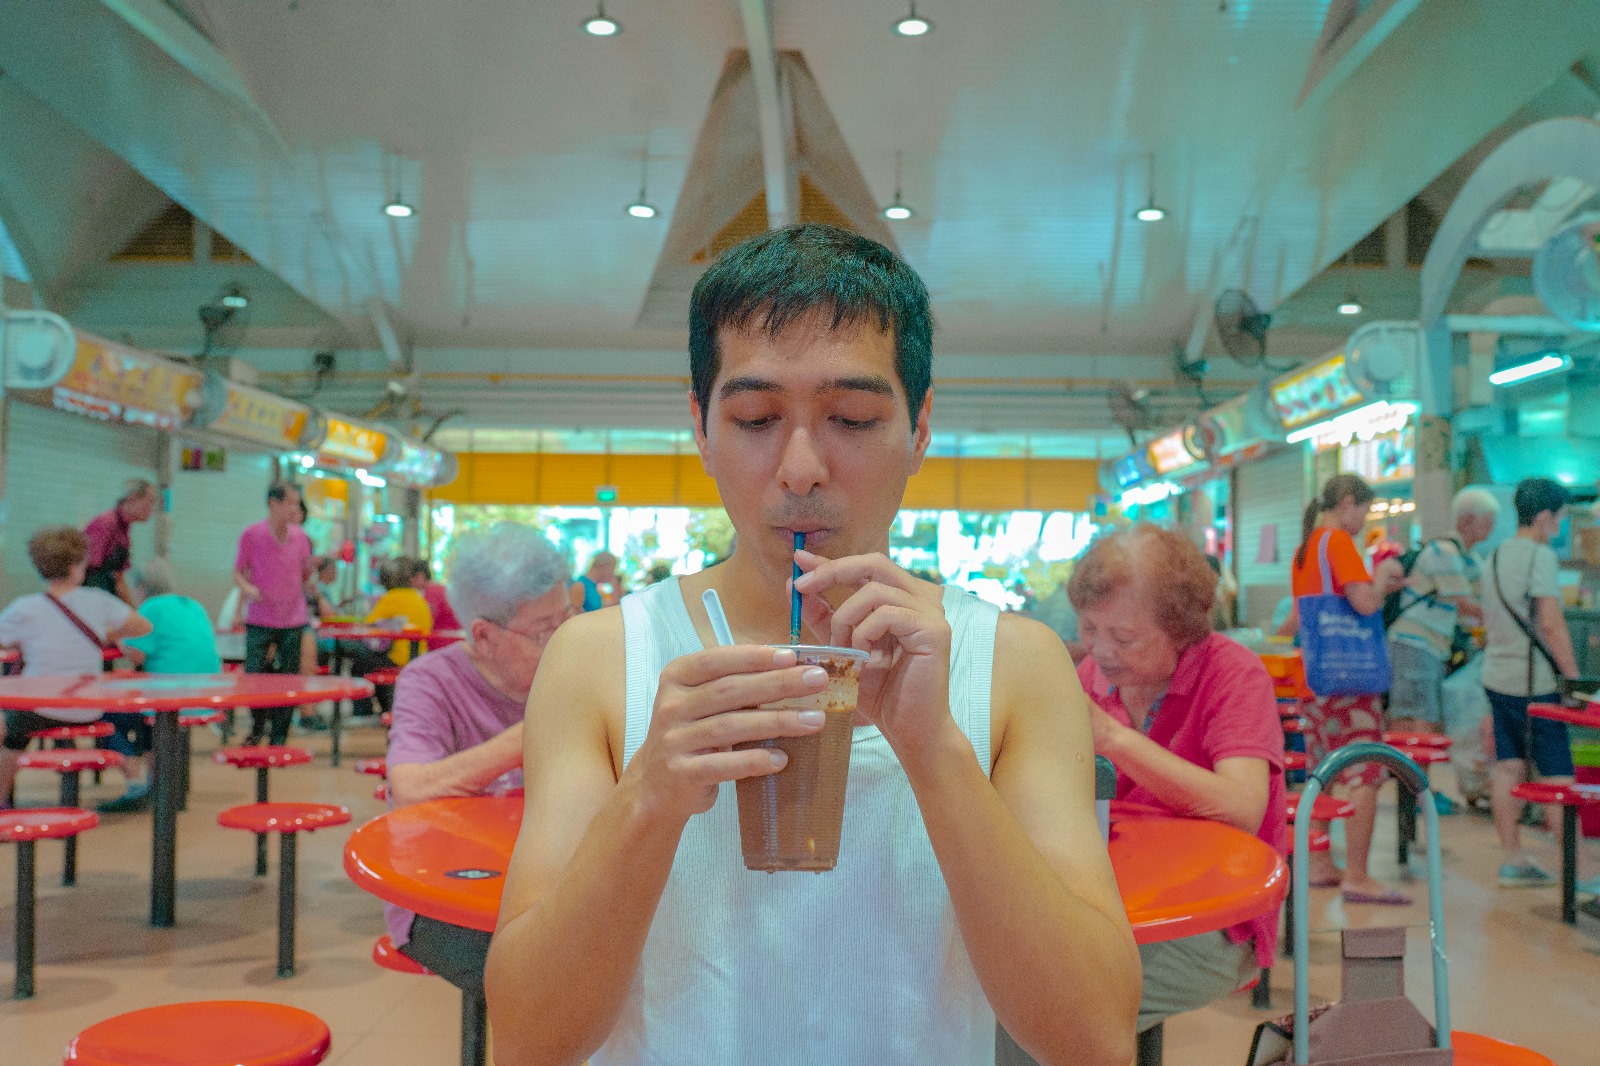 Ashish Kumar sips on an iced coffee at a hawker centre. Oh, the joys of early retirement. 